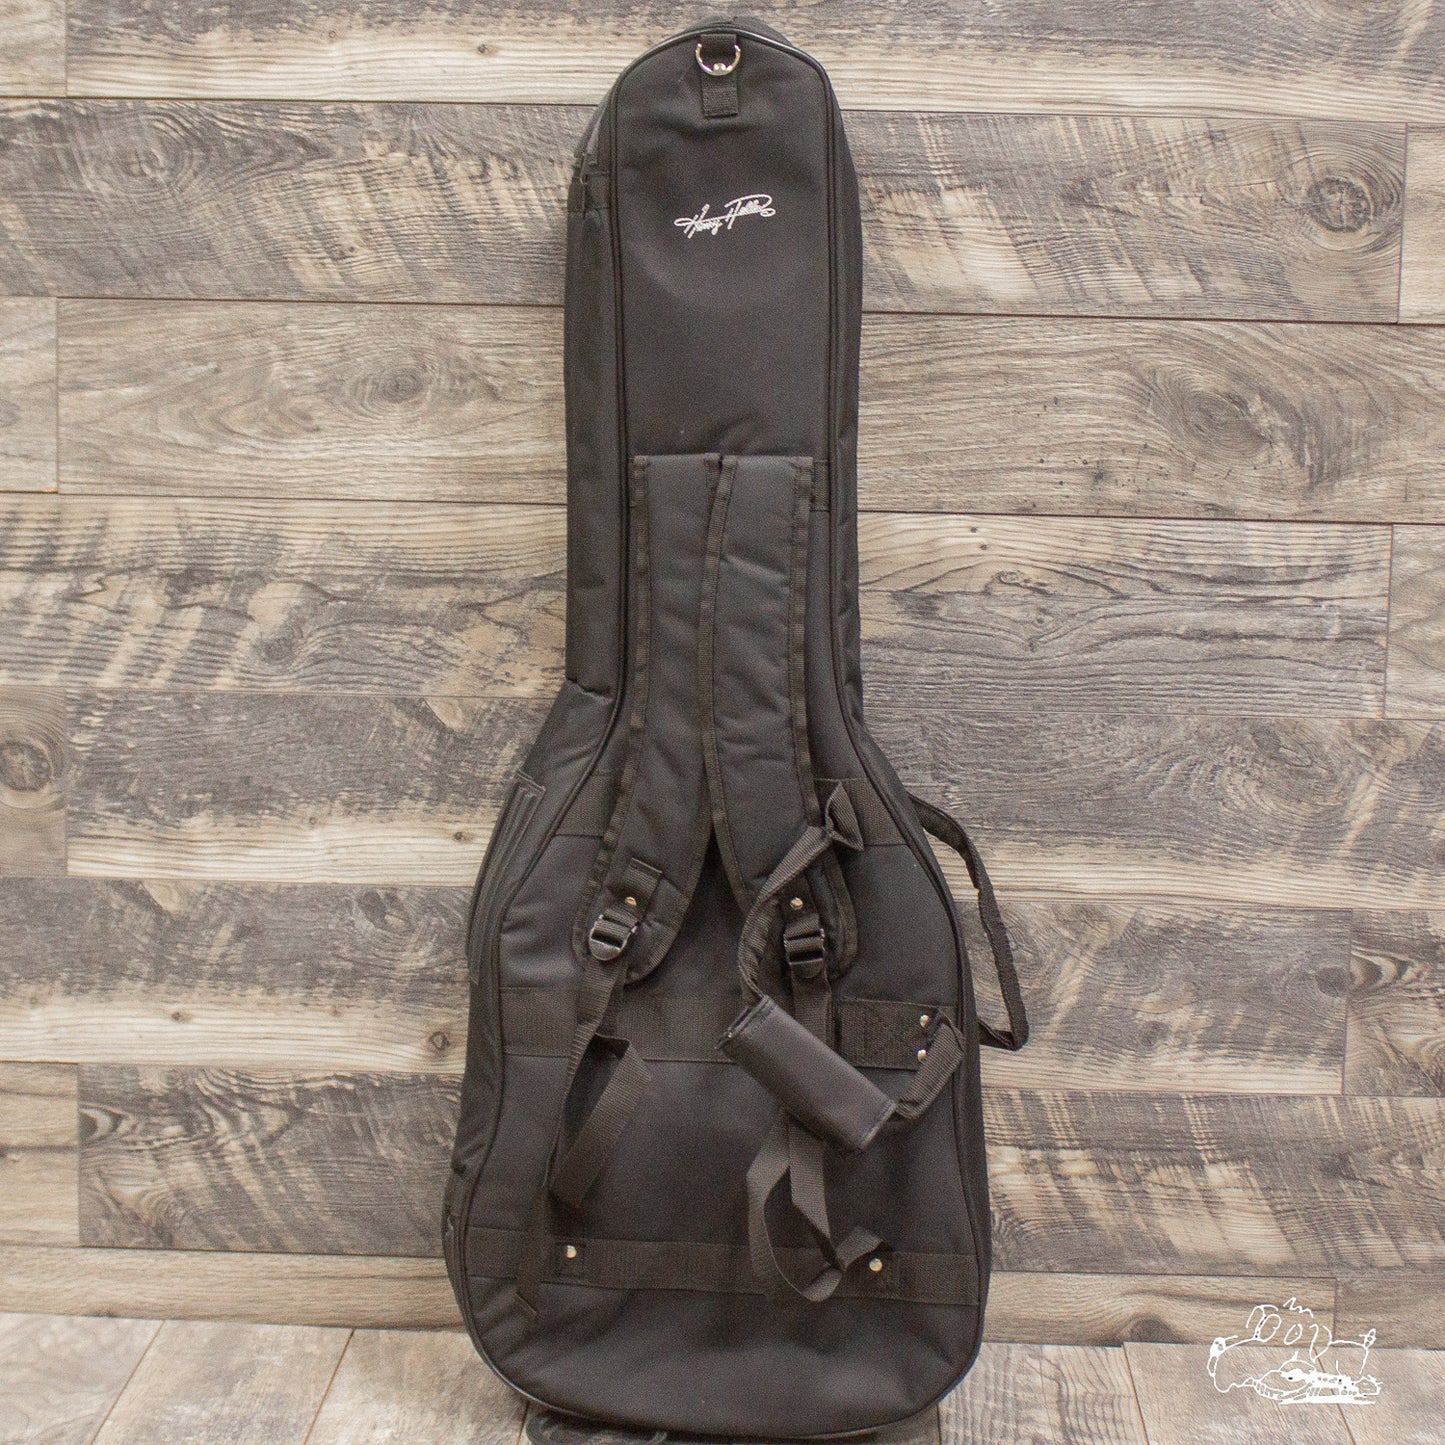 Garrett Park Guitars Embroidered Deluxe Double Electric Guitar Gig Bag